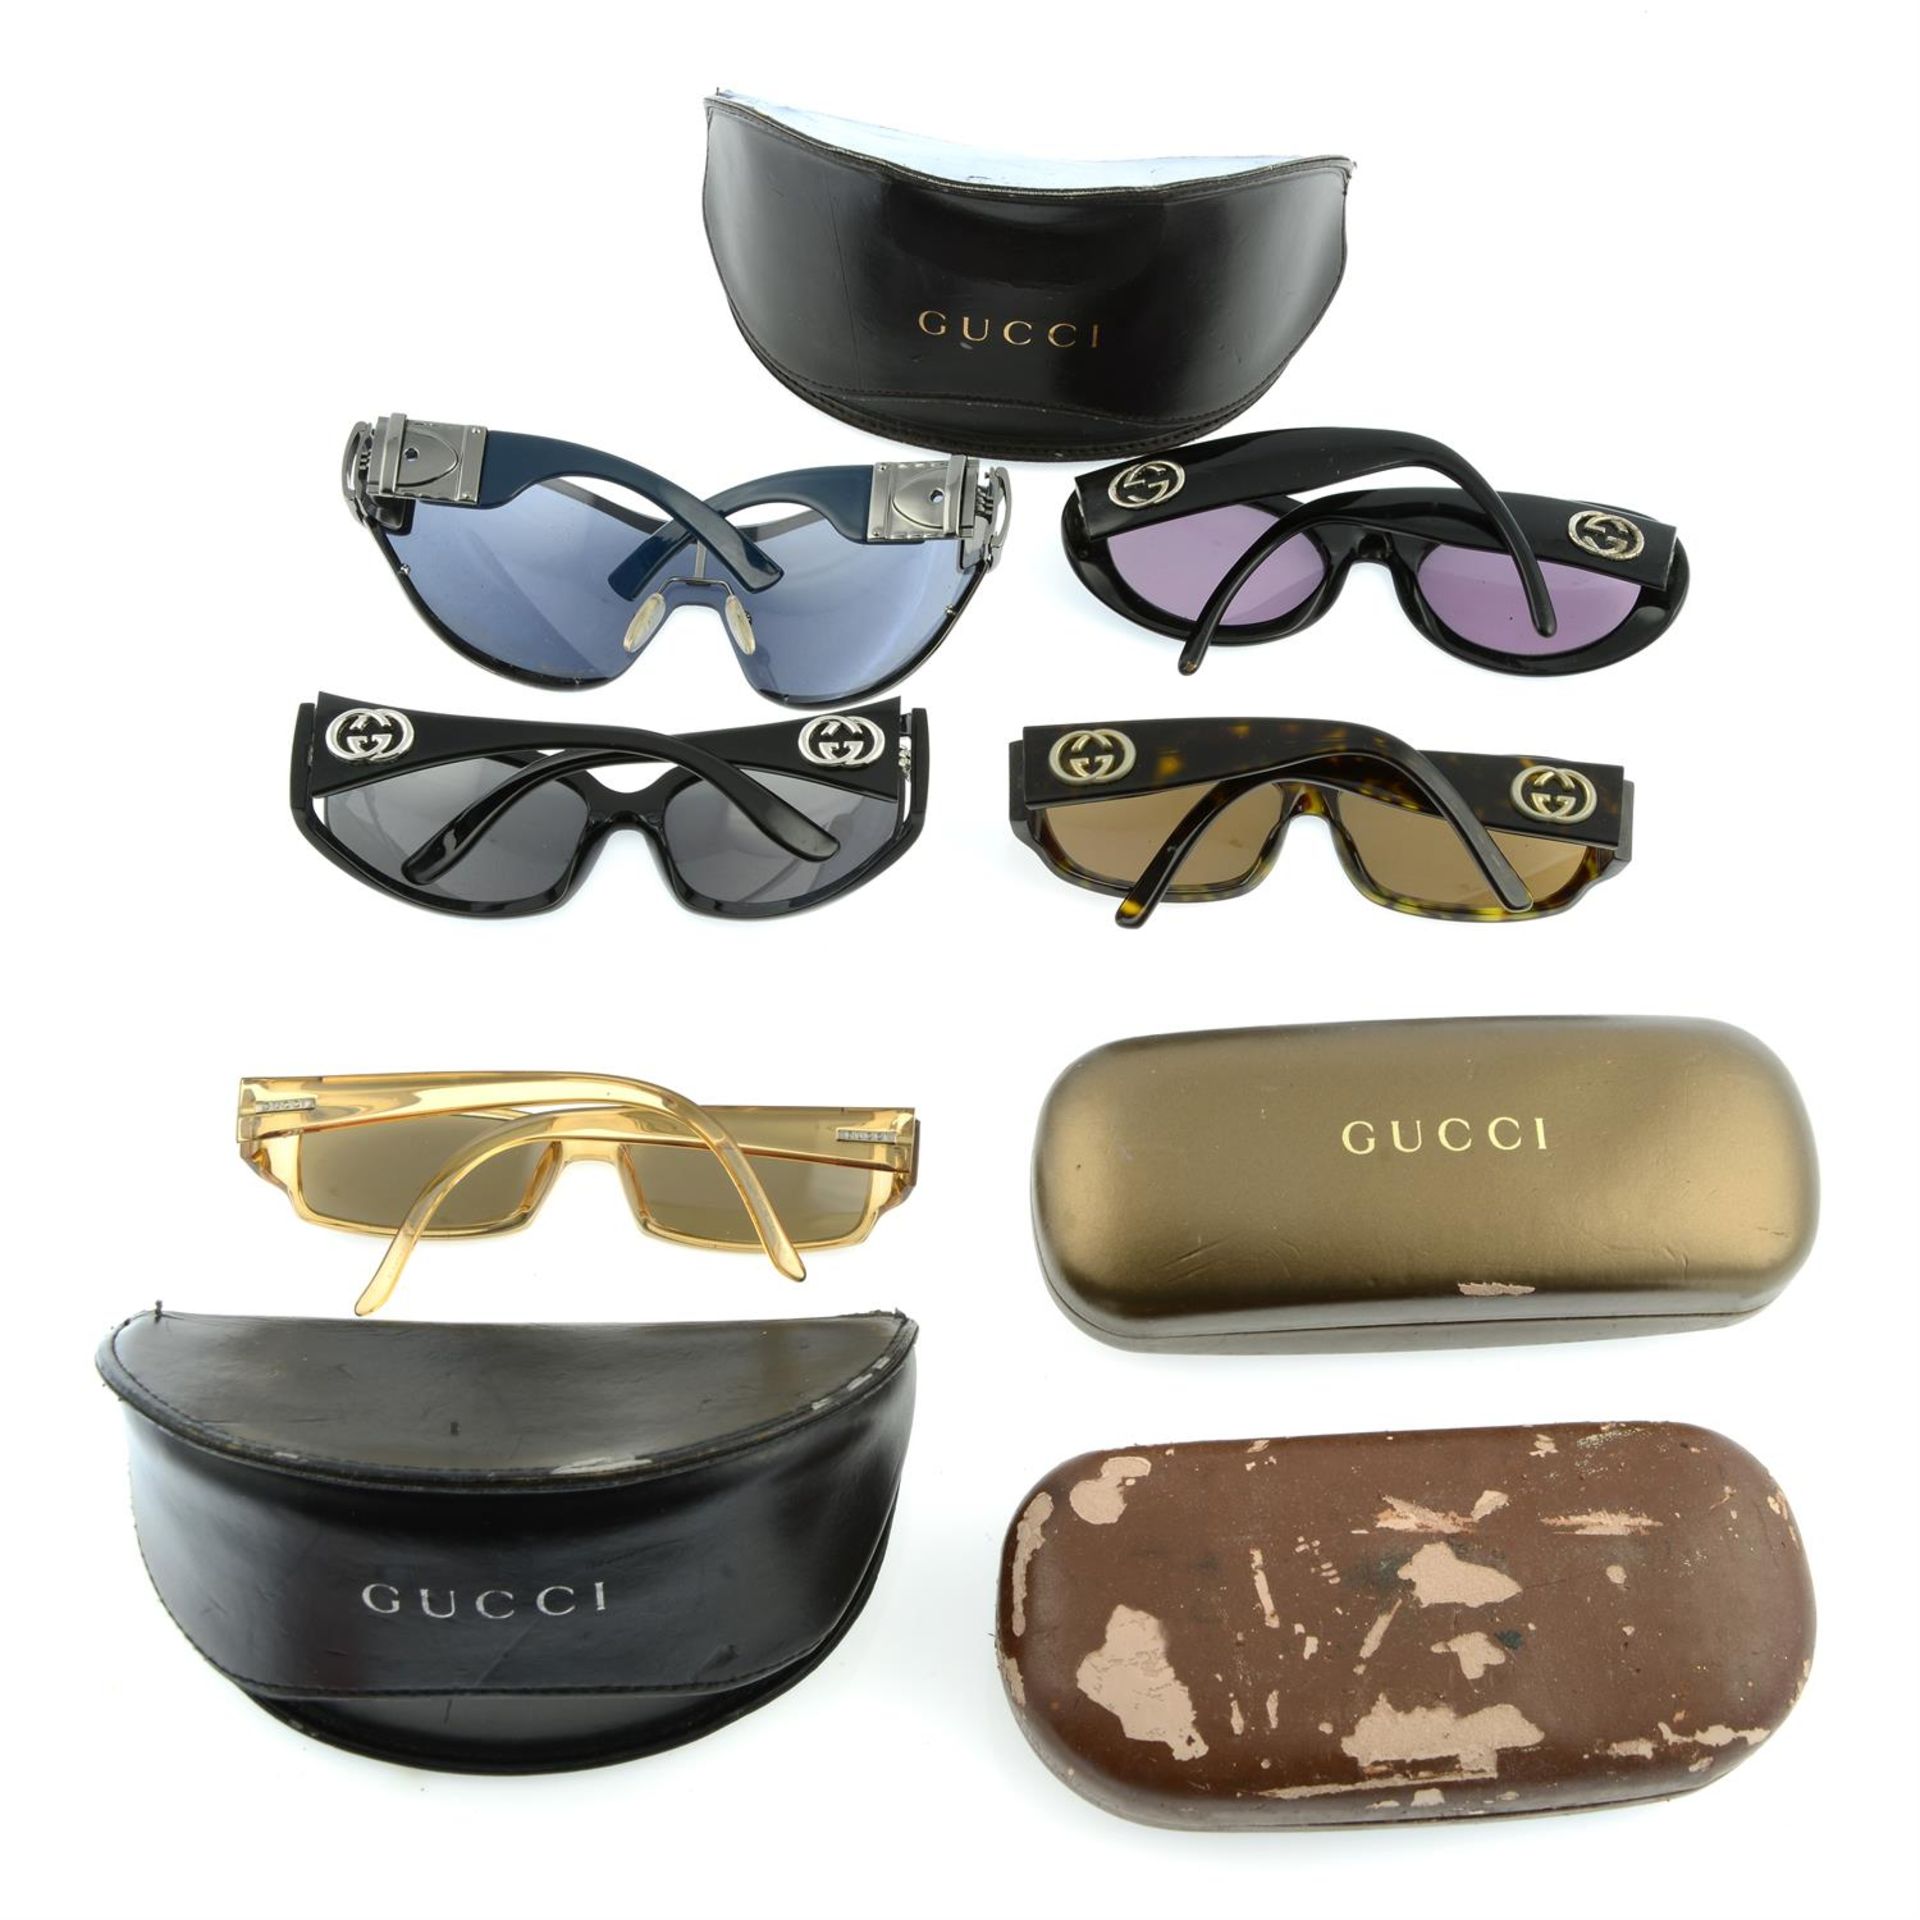 GUCCI - three pairs of sunglasses and two pairs of prescription sunglasses. - Image 2 of 2